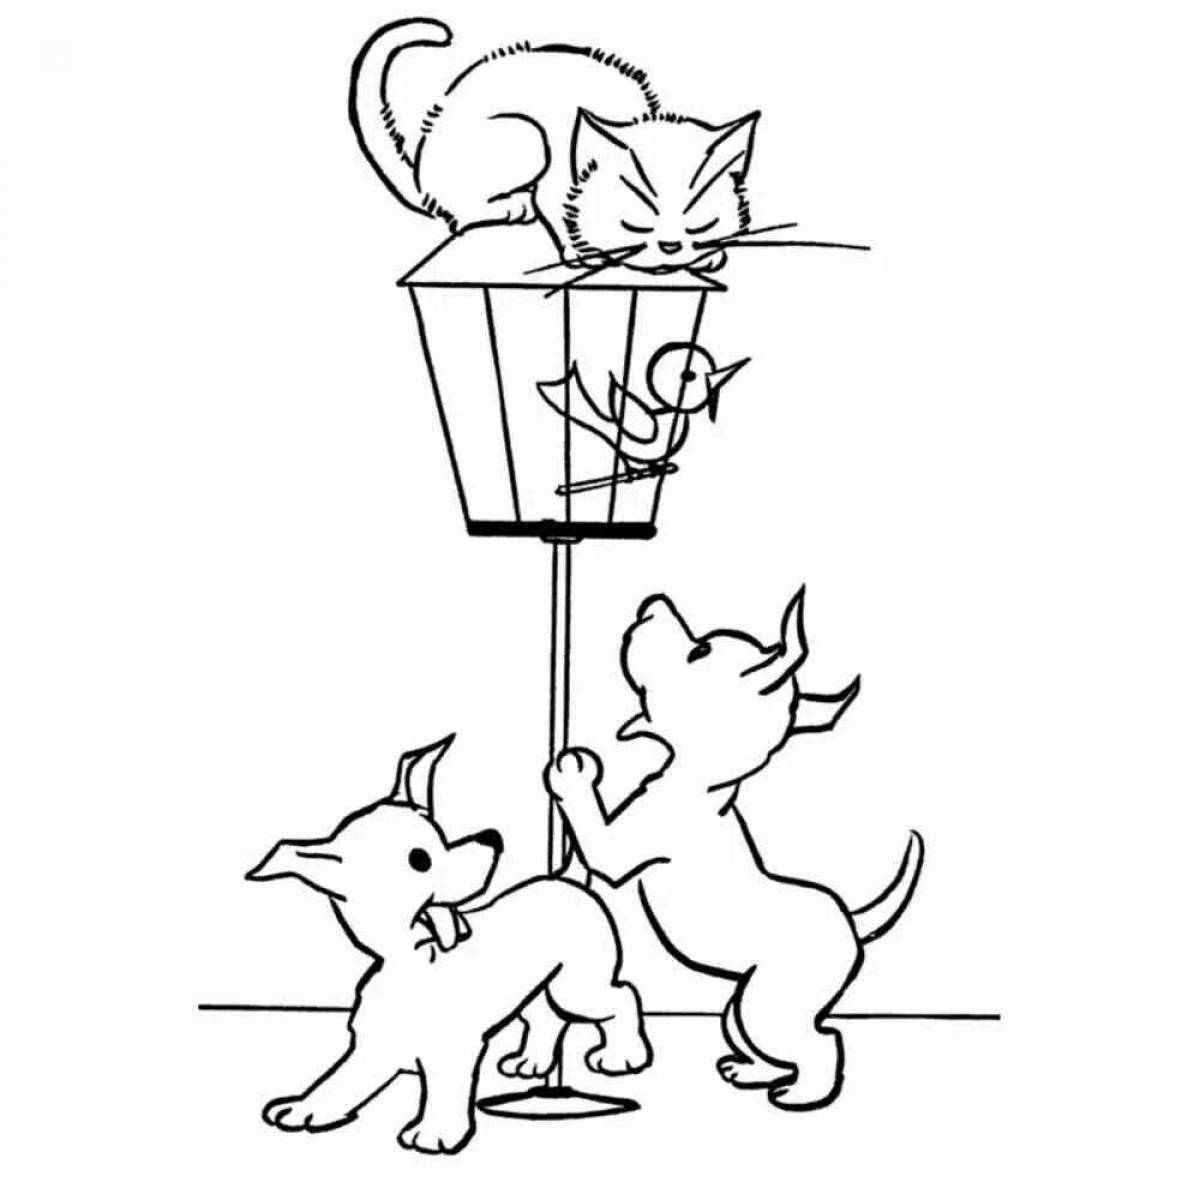 Adorable kitten and dog coloring book